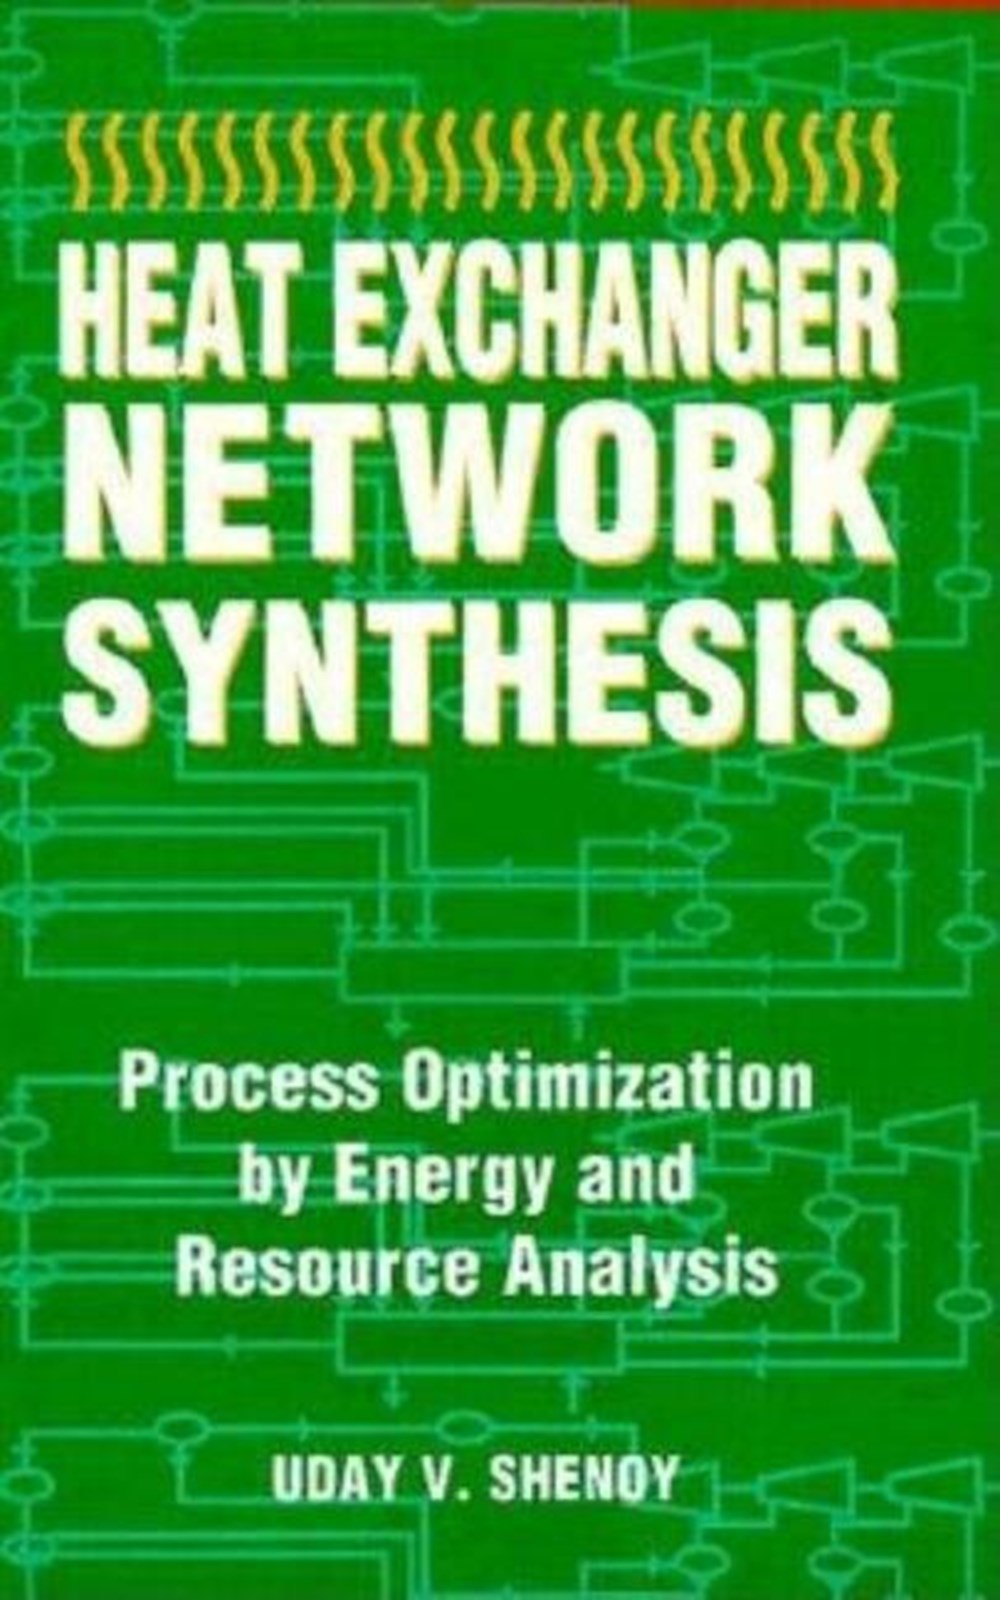 Heat Exchanger Network Synthesis:: Process Optimization by Energy and Resource Analysis